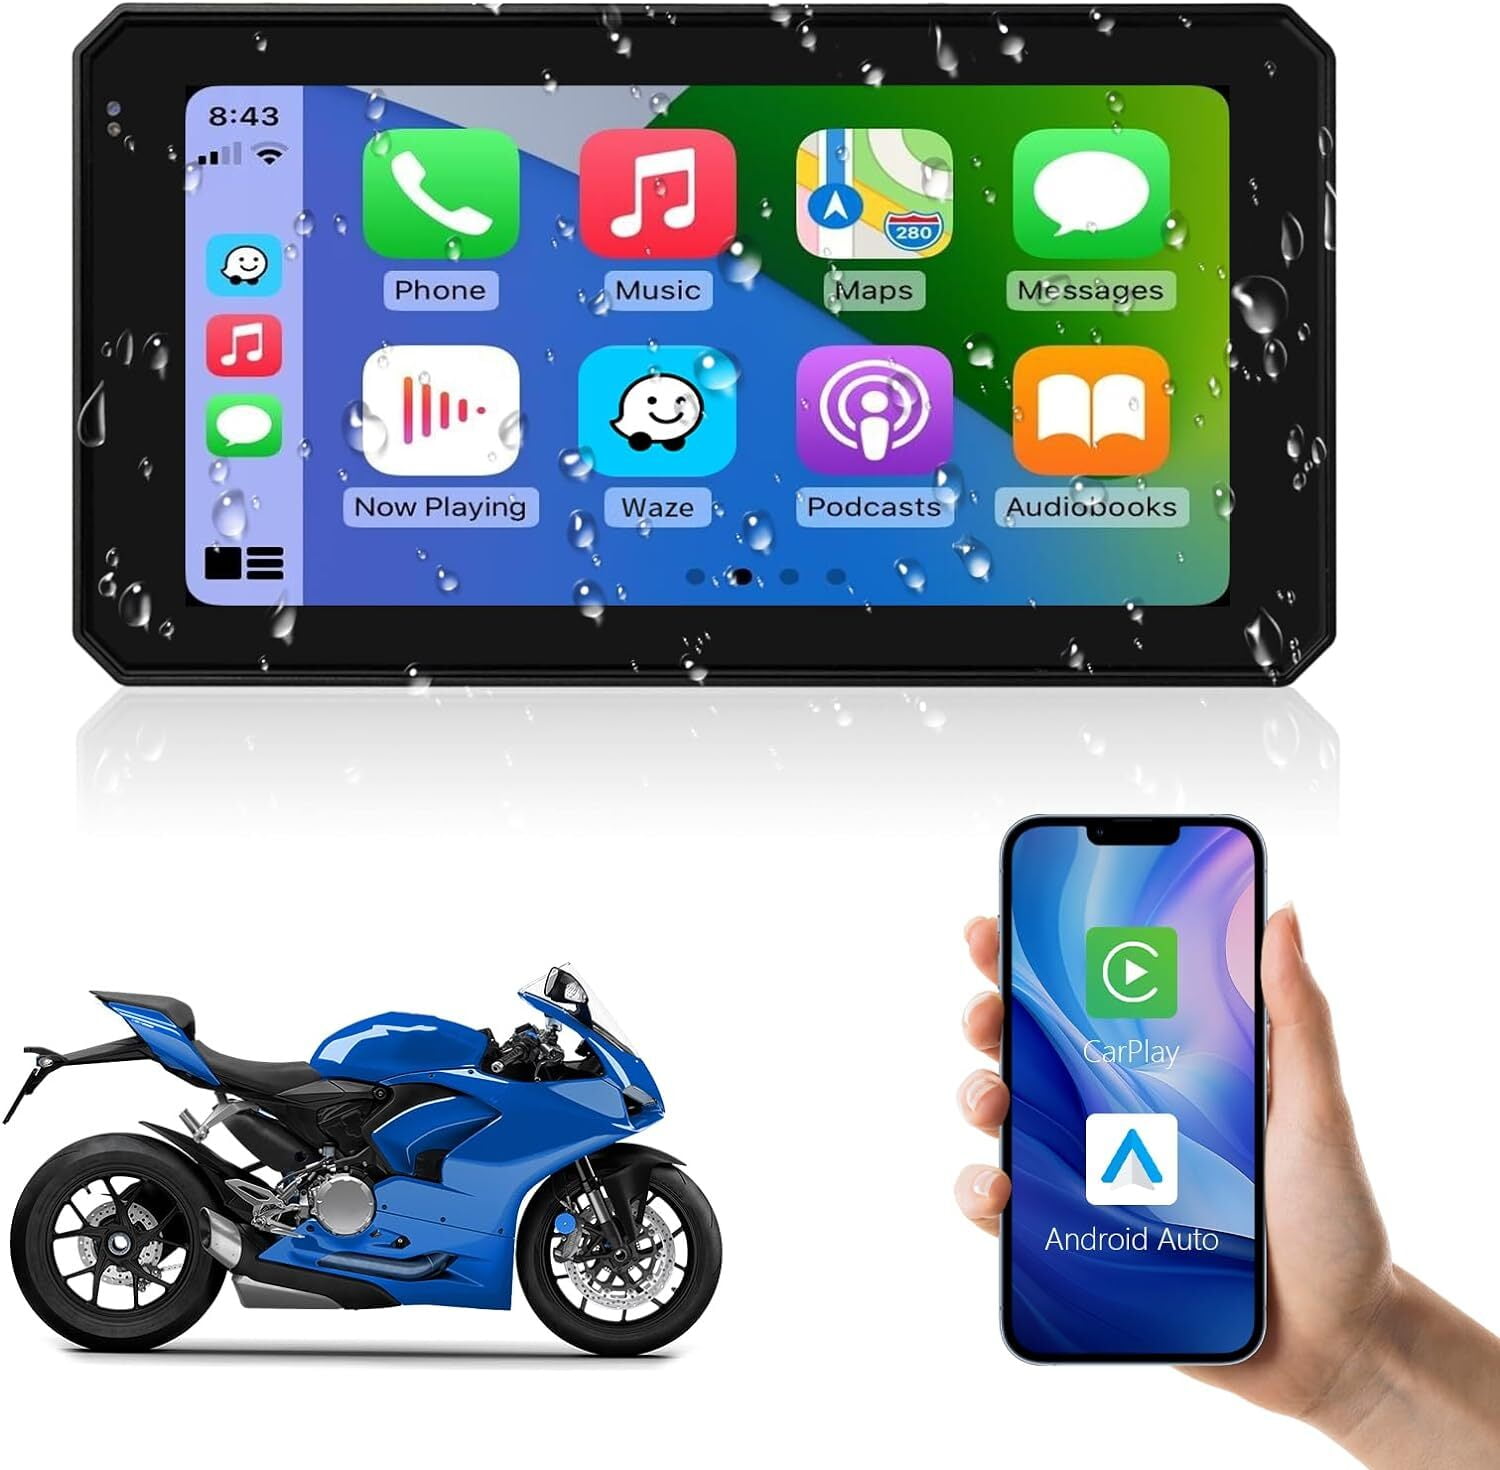 5 inch Motorcycle Wireless Carplay Android Auto Screen IPX7 Waterproof  Navegador Gps Moto